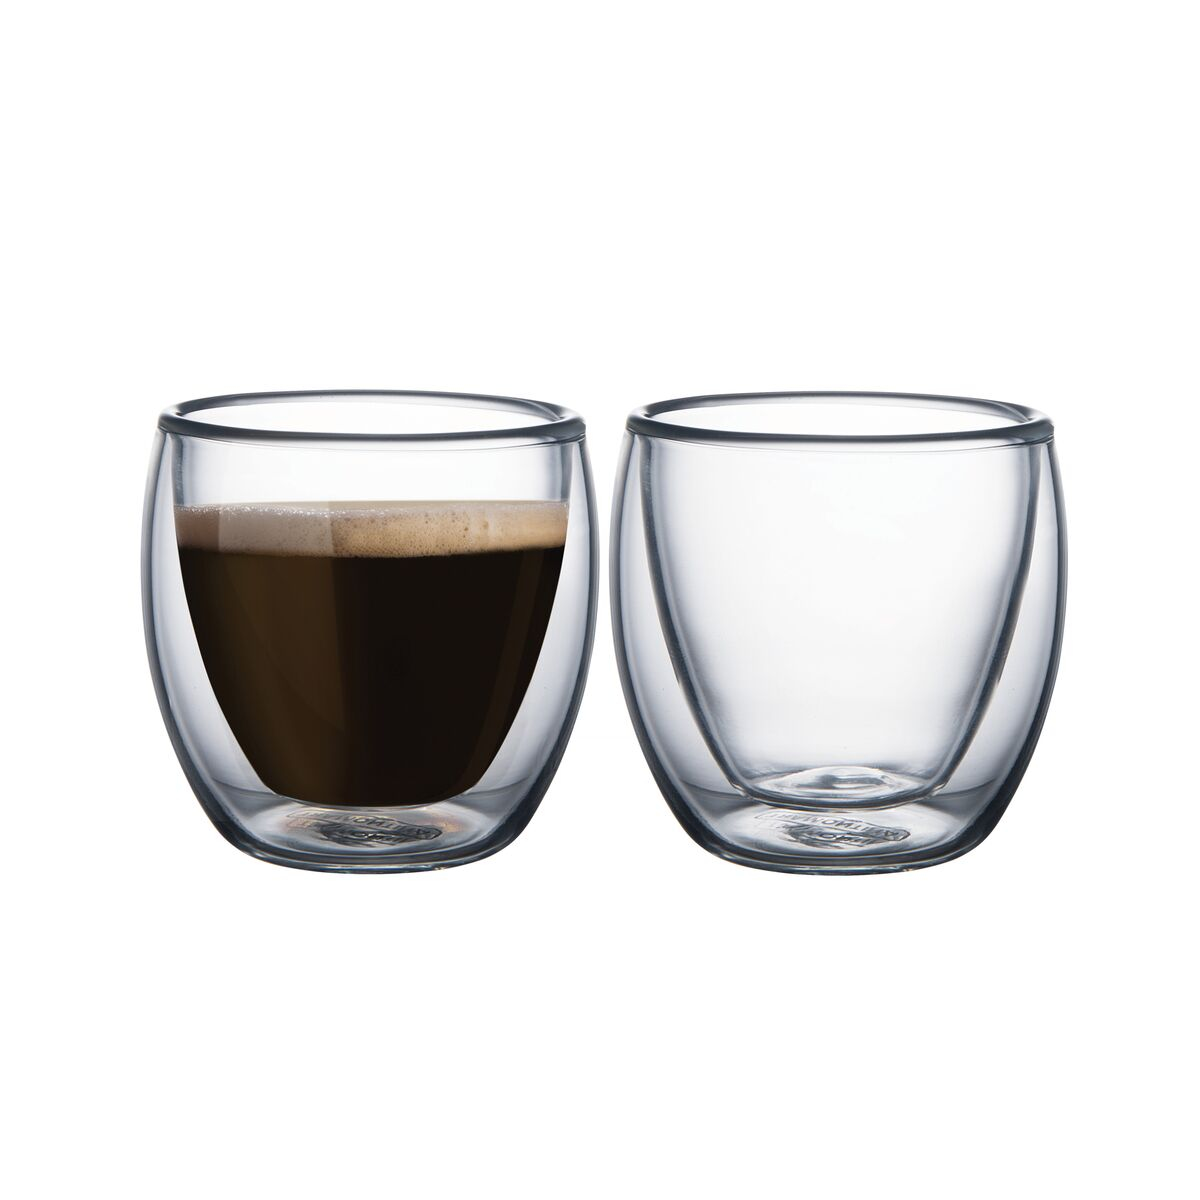 Tramontina double-walled glass coffee cup set, 2 pieces